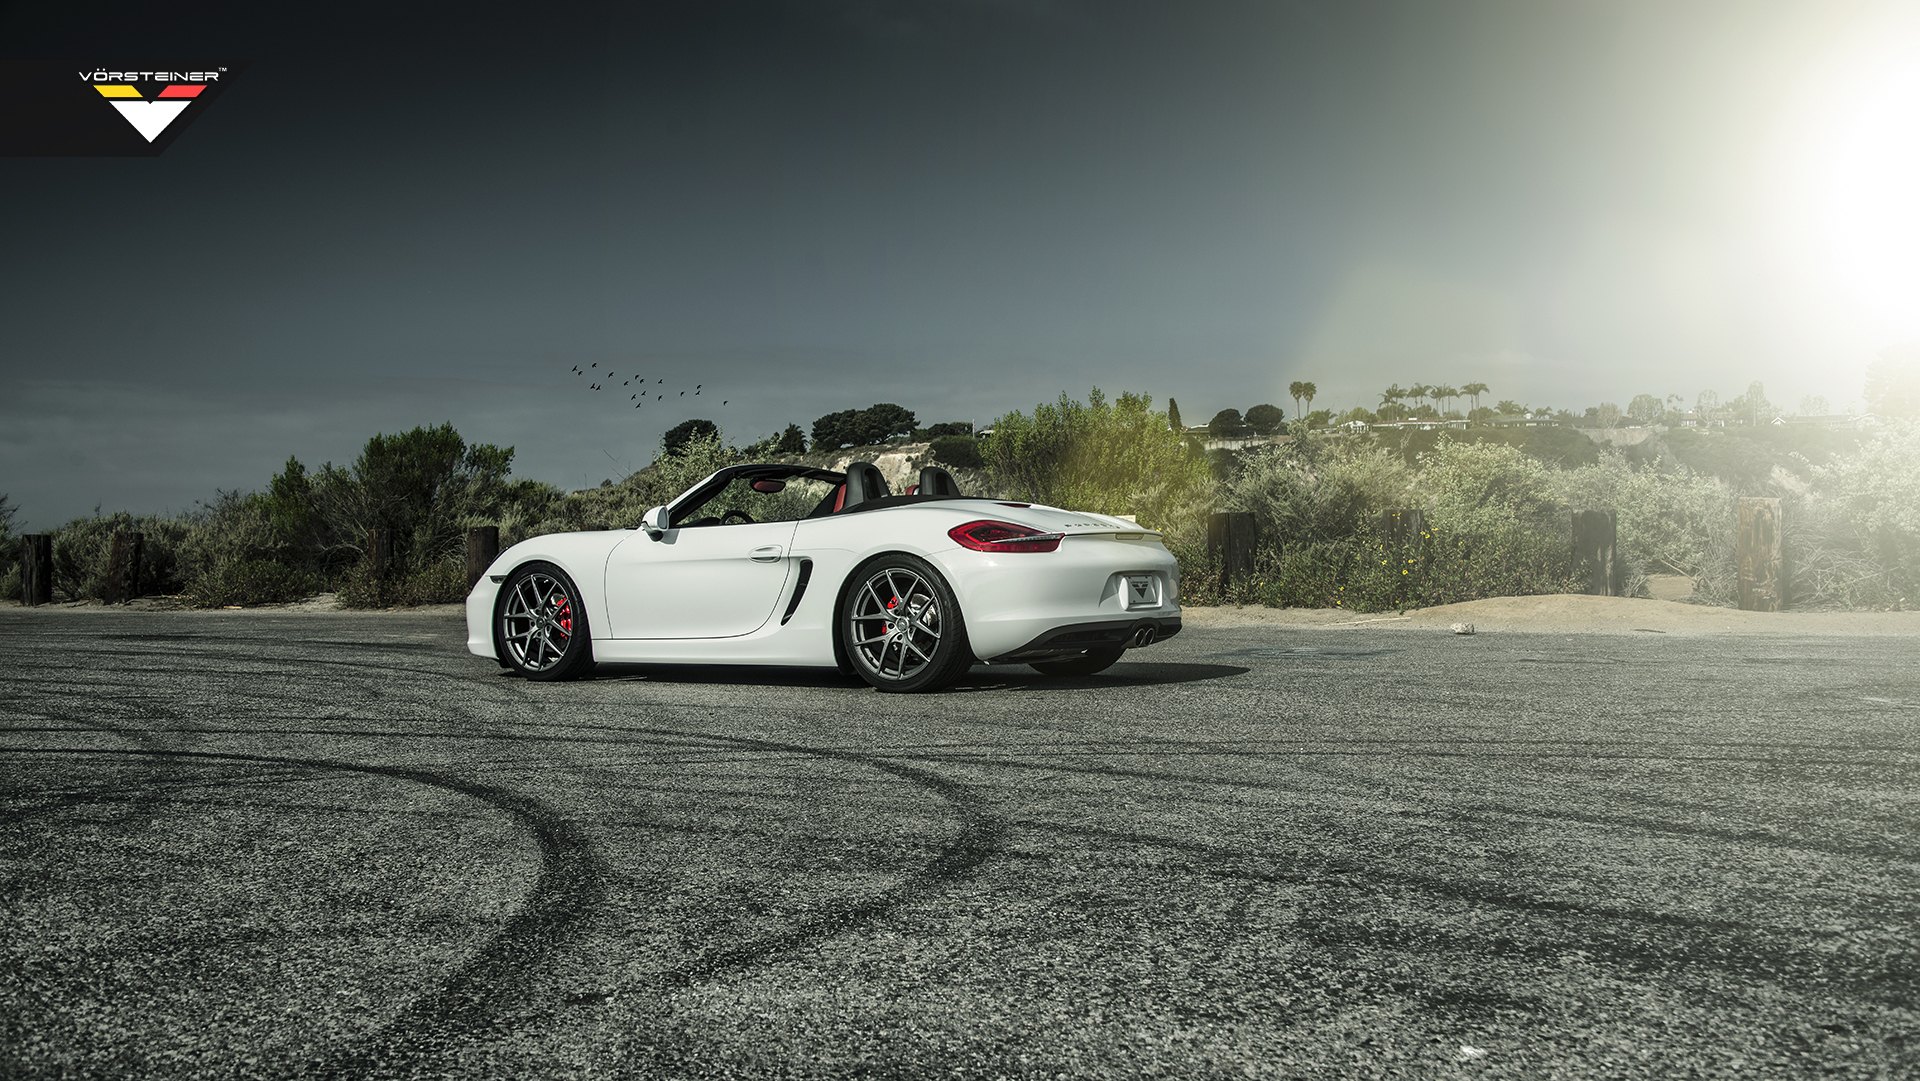 White Convertible Porsche Boxster with Custom Side Skirts - Photo by Vorstiner